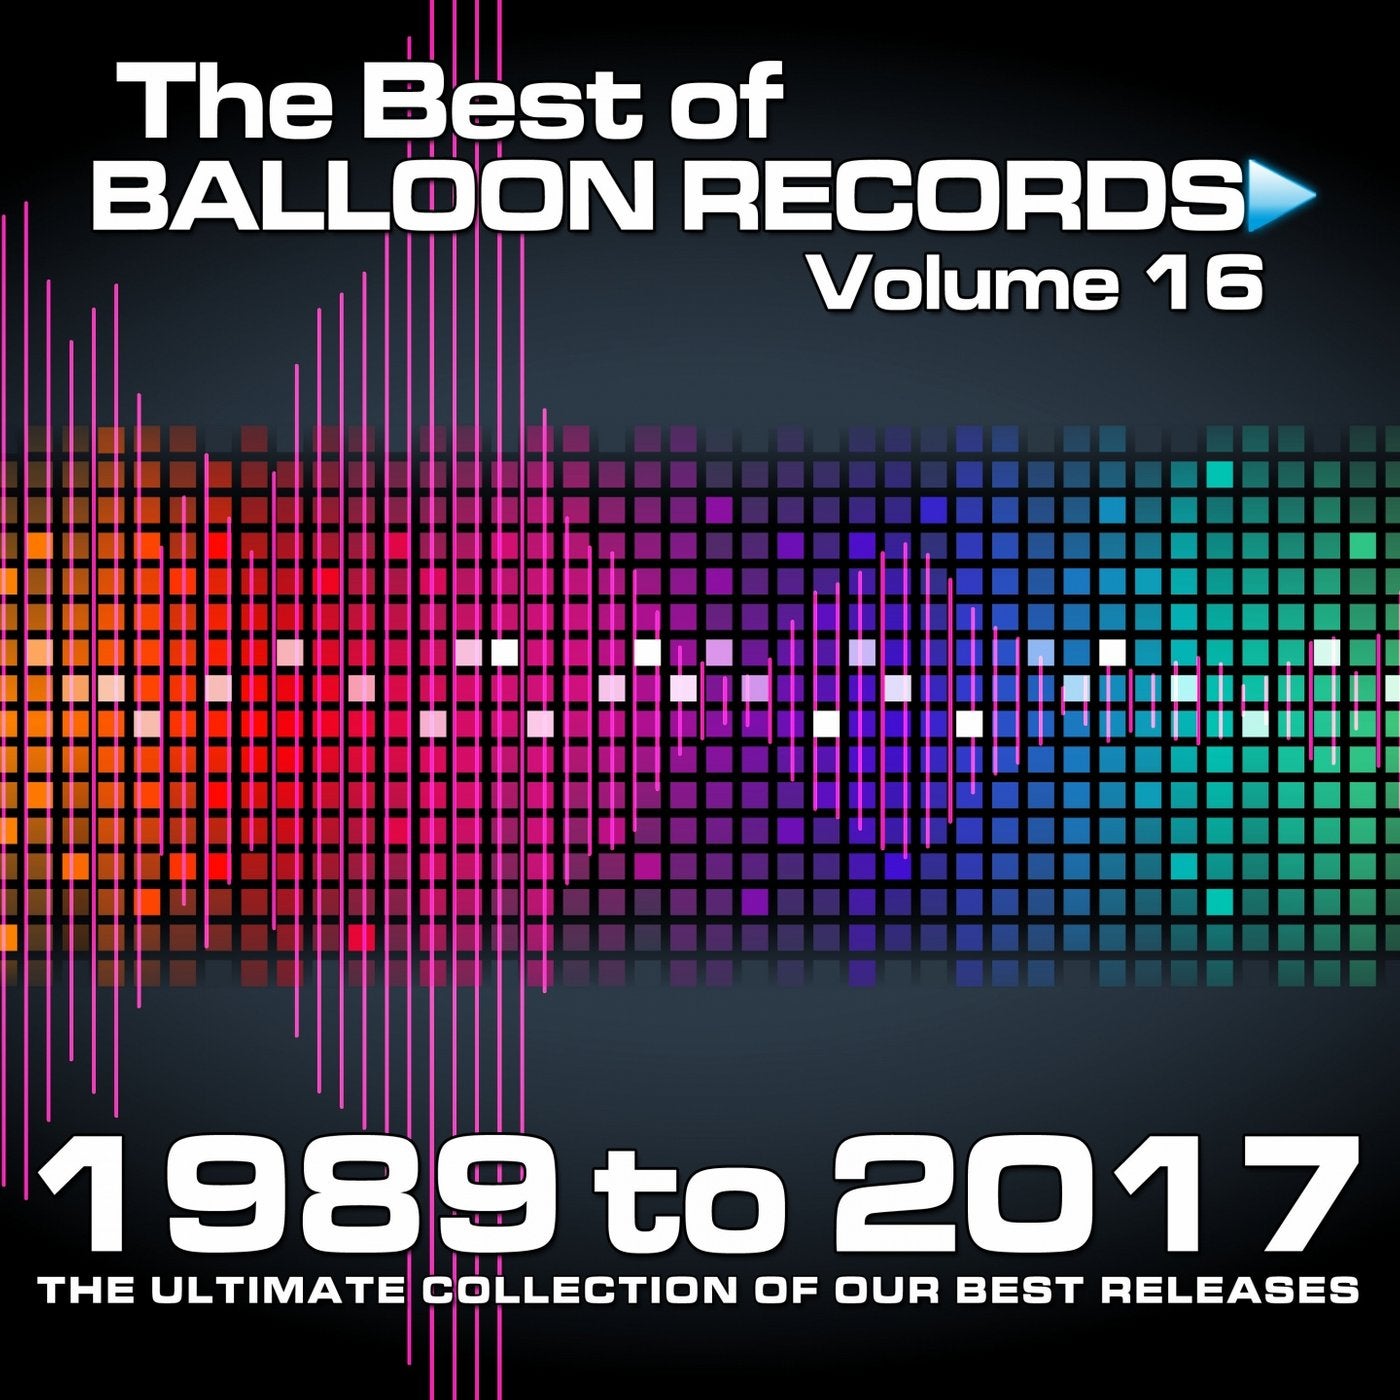 Best of Balloon Records 16 (( The Ultimate Collection of Our Best Releases, 1989 to 2017 ))